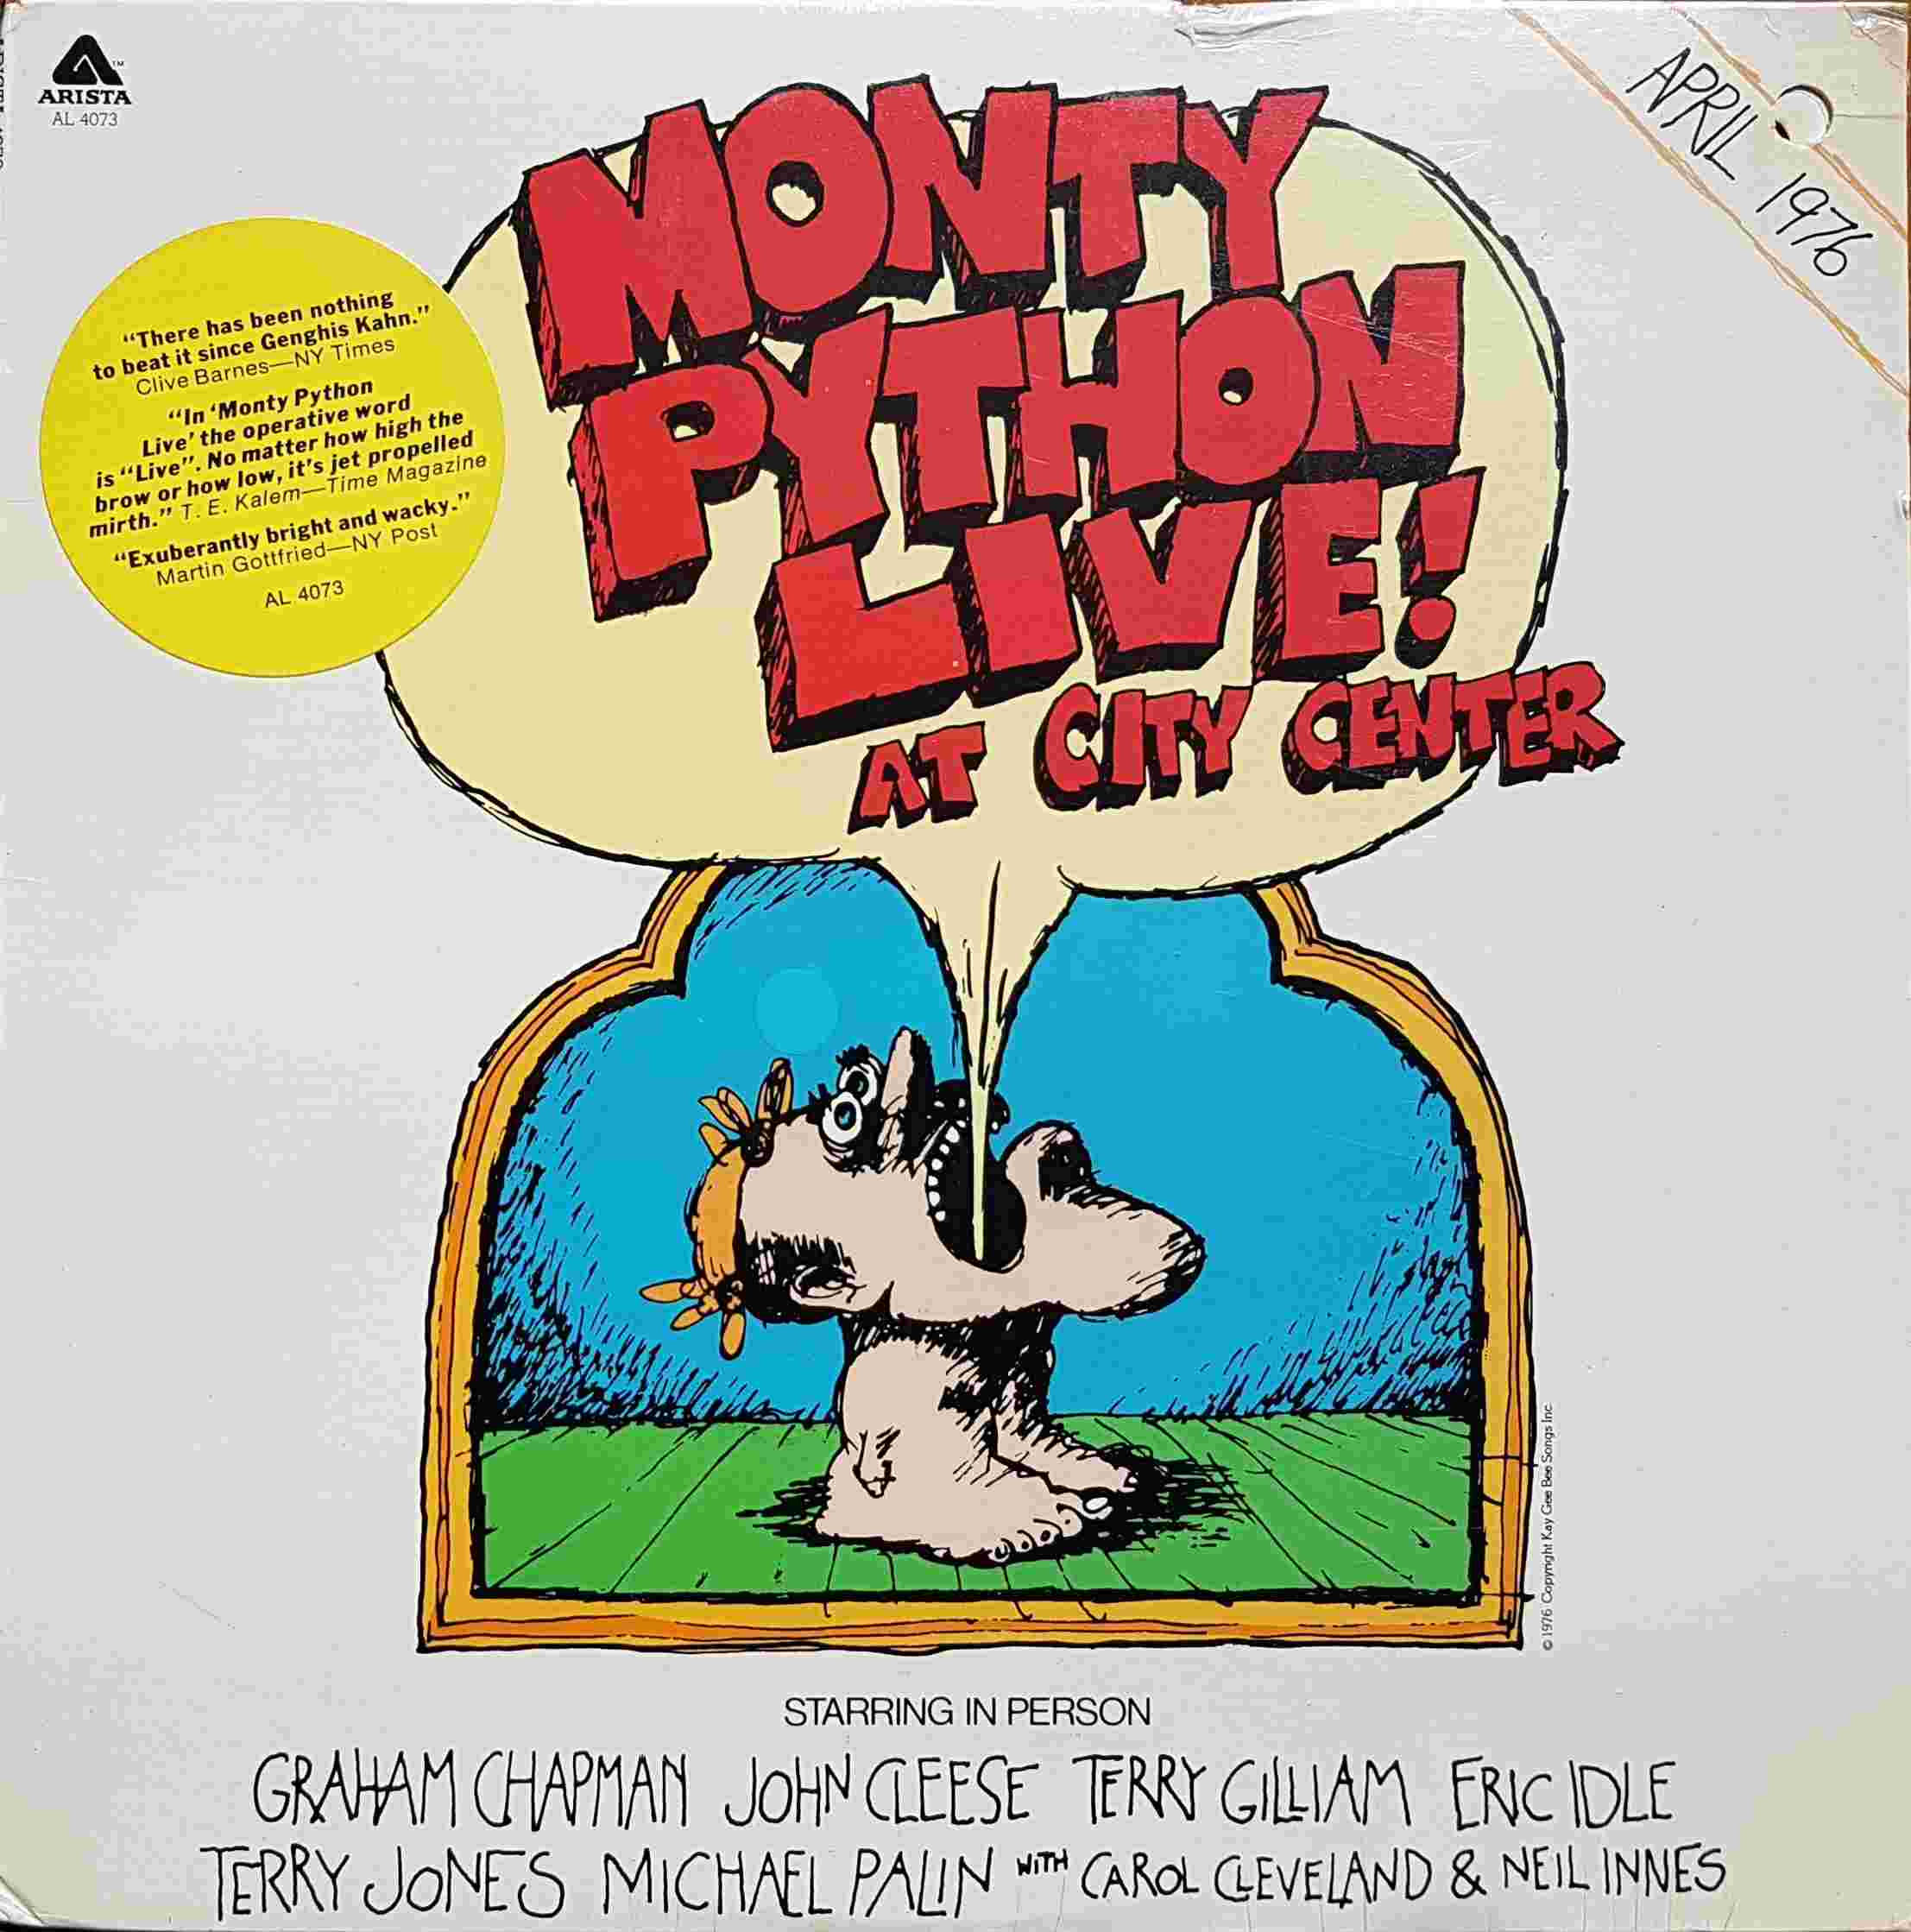 Picture of Monty Python live ! At the City Centre by artist Monty Python from the BBC albums - Records and Tapes library